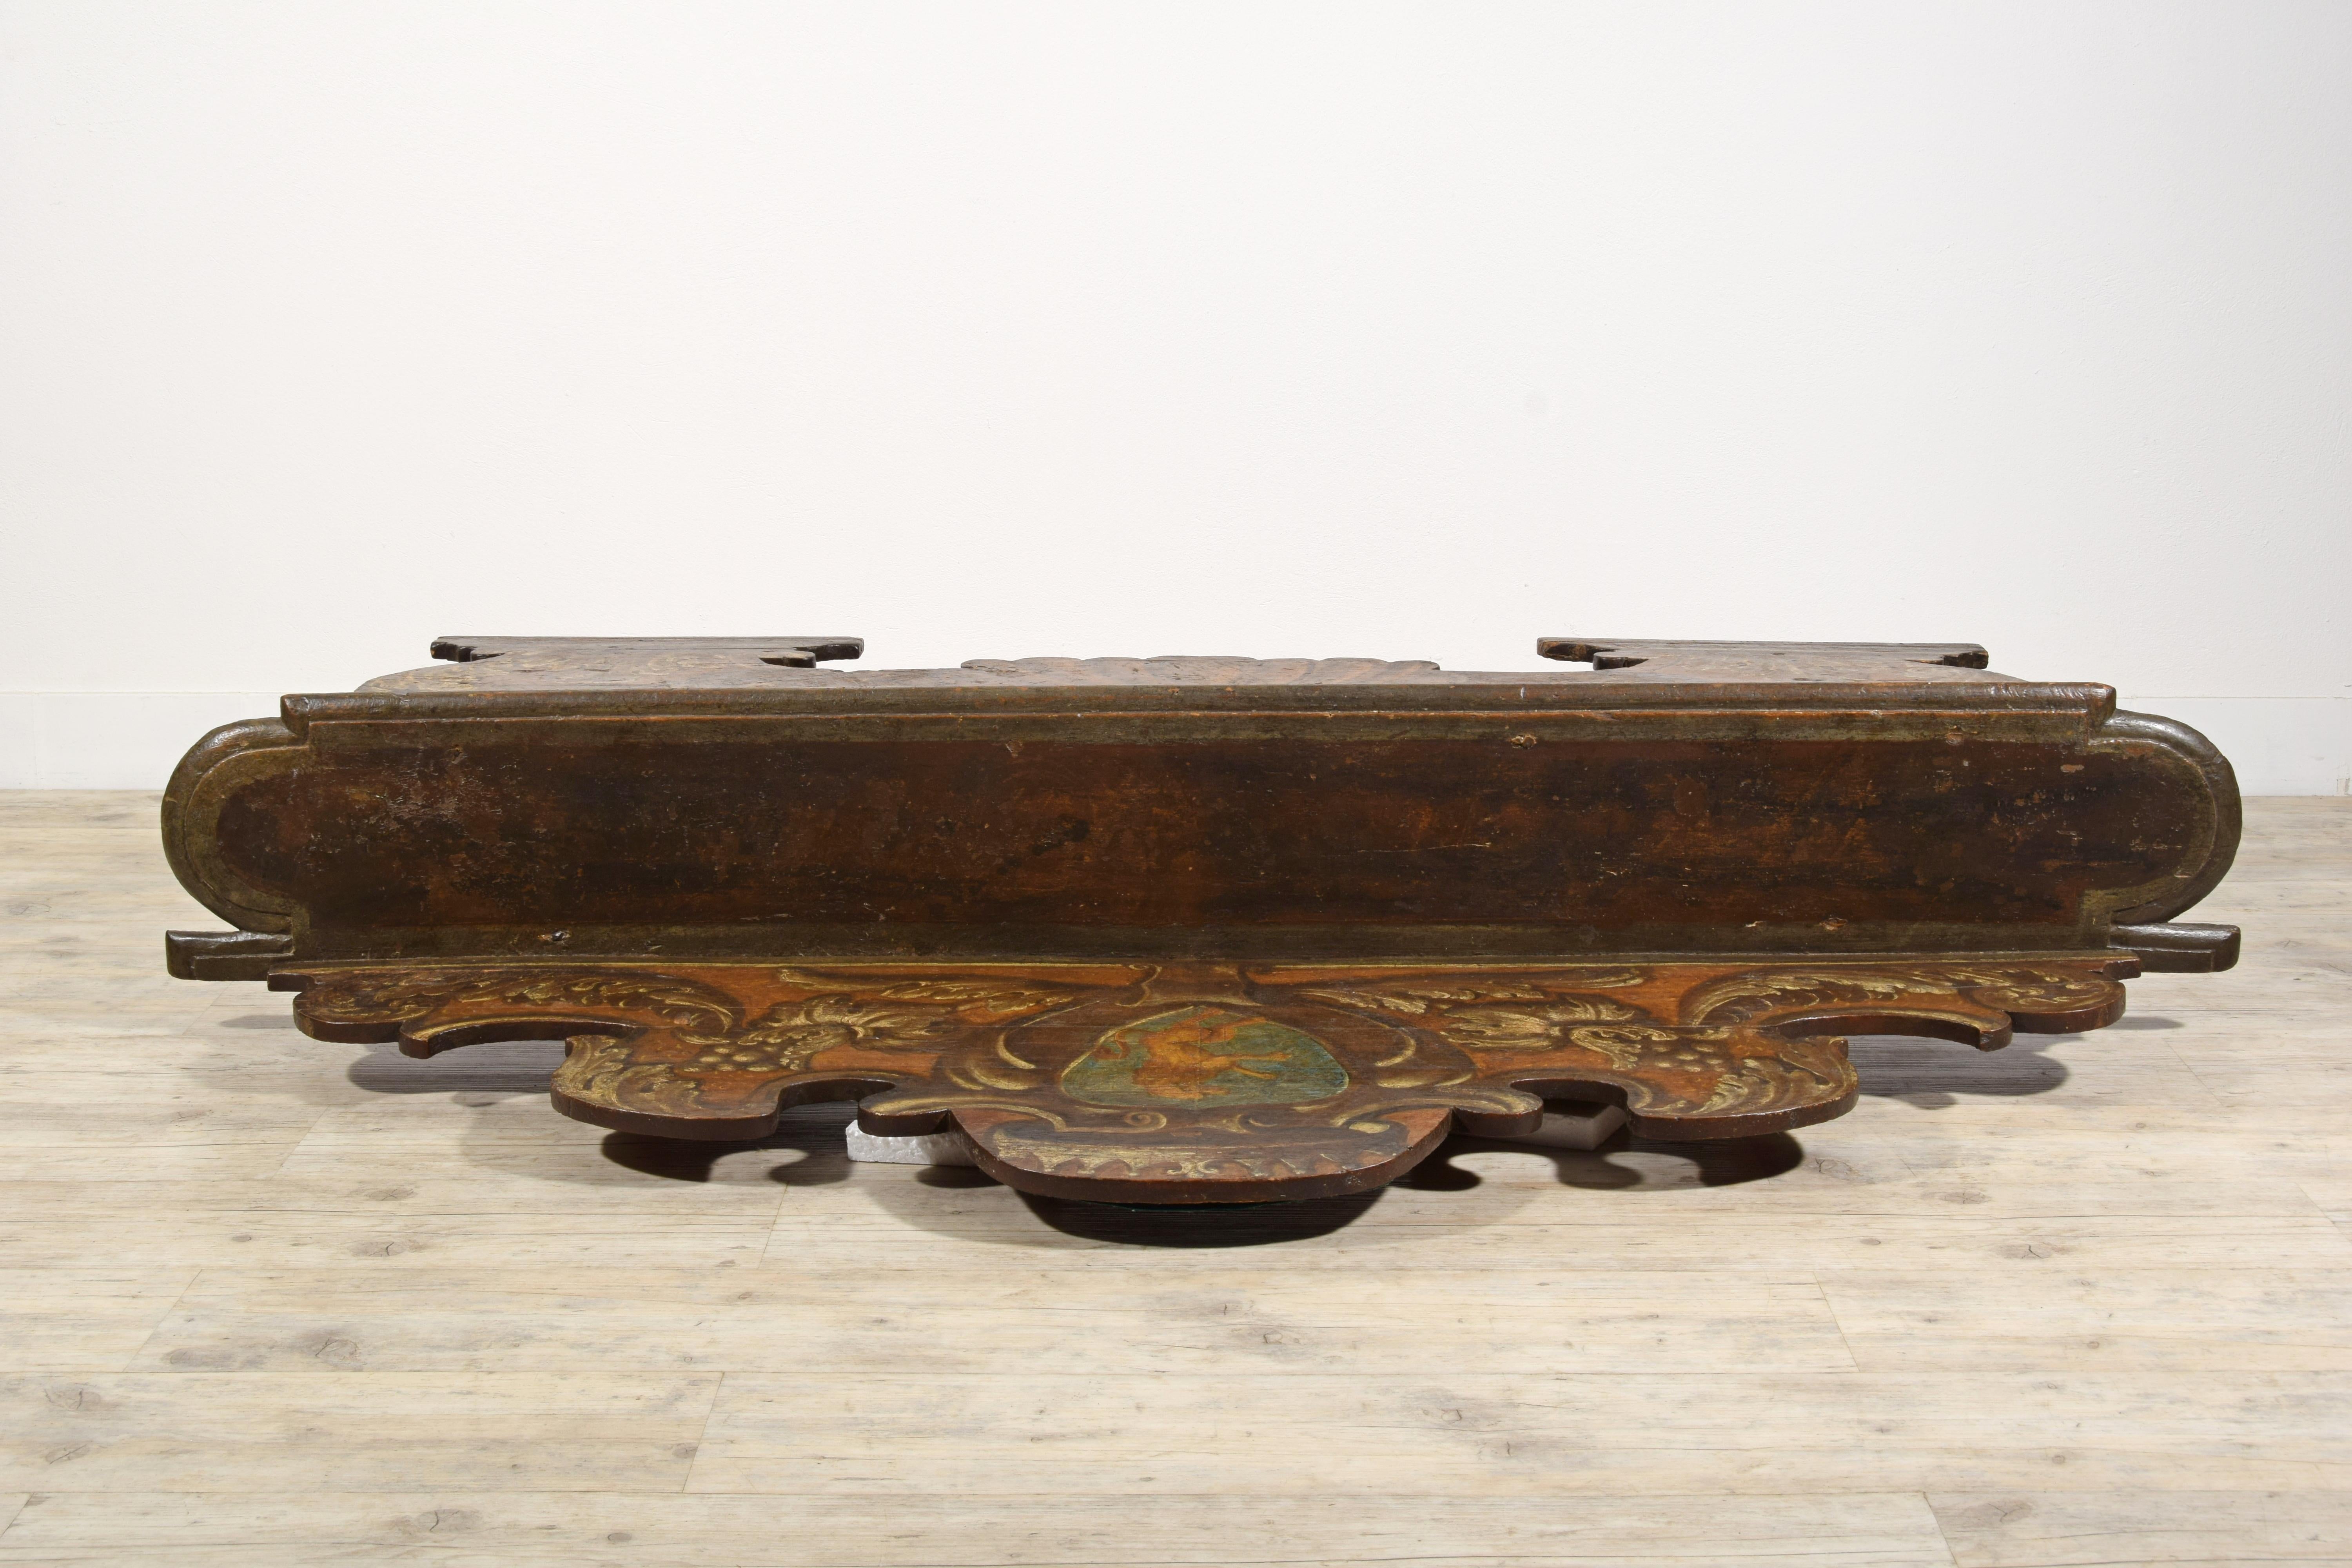 17th century, Italian Baroque Lacquered Wood Bench  14